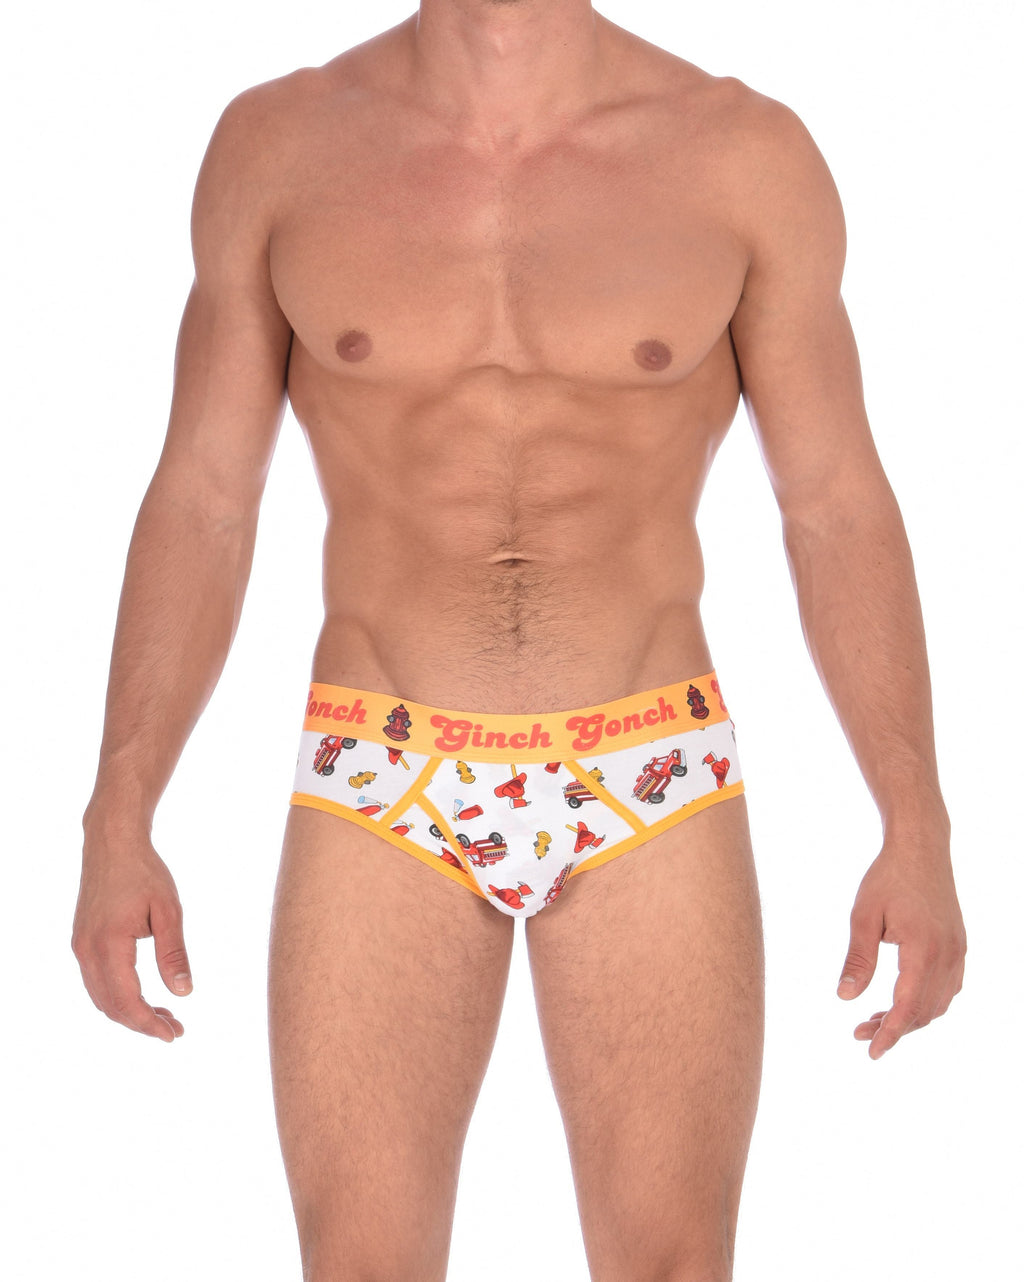 Ginch Gonch GG Fire Fighters Low Rise Brief mens y front underwear white fabric with fire engines hats and hydrants, yellow trim and yellow printed waistband front